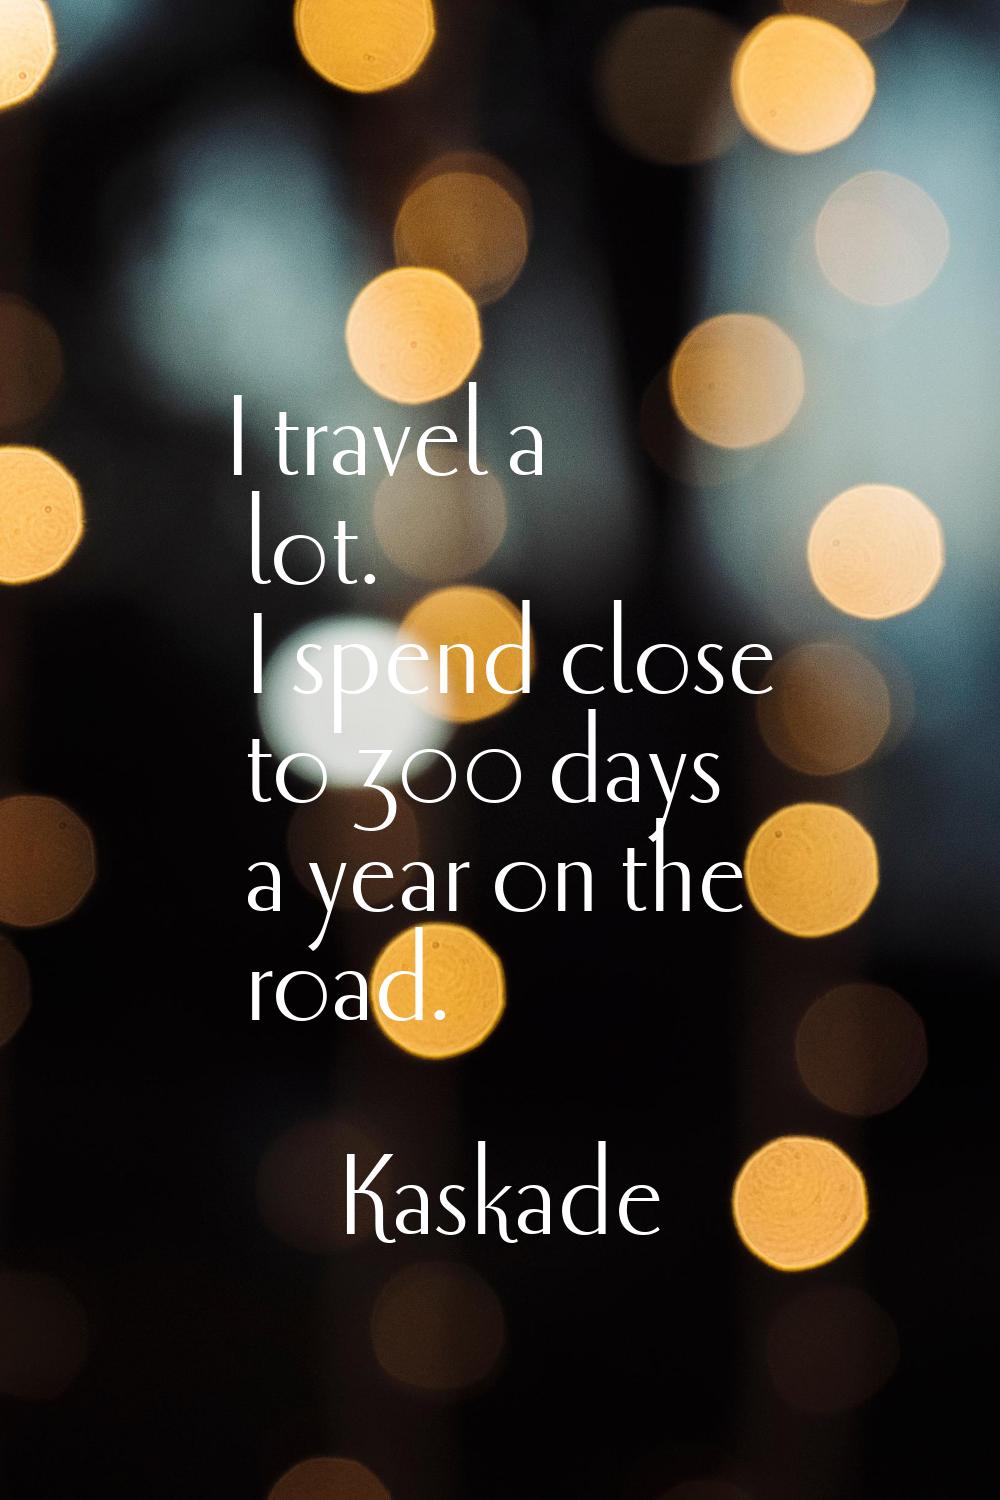 I travel a lot. I spend close to 300 days a year on the road.